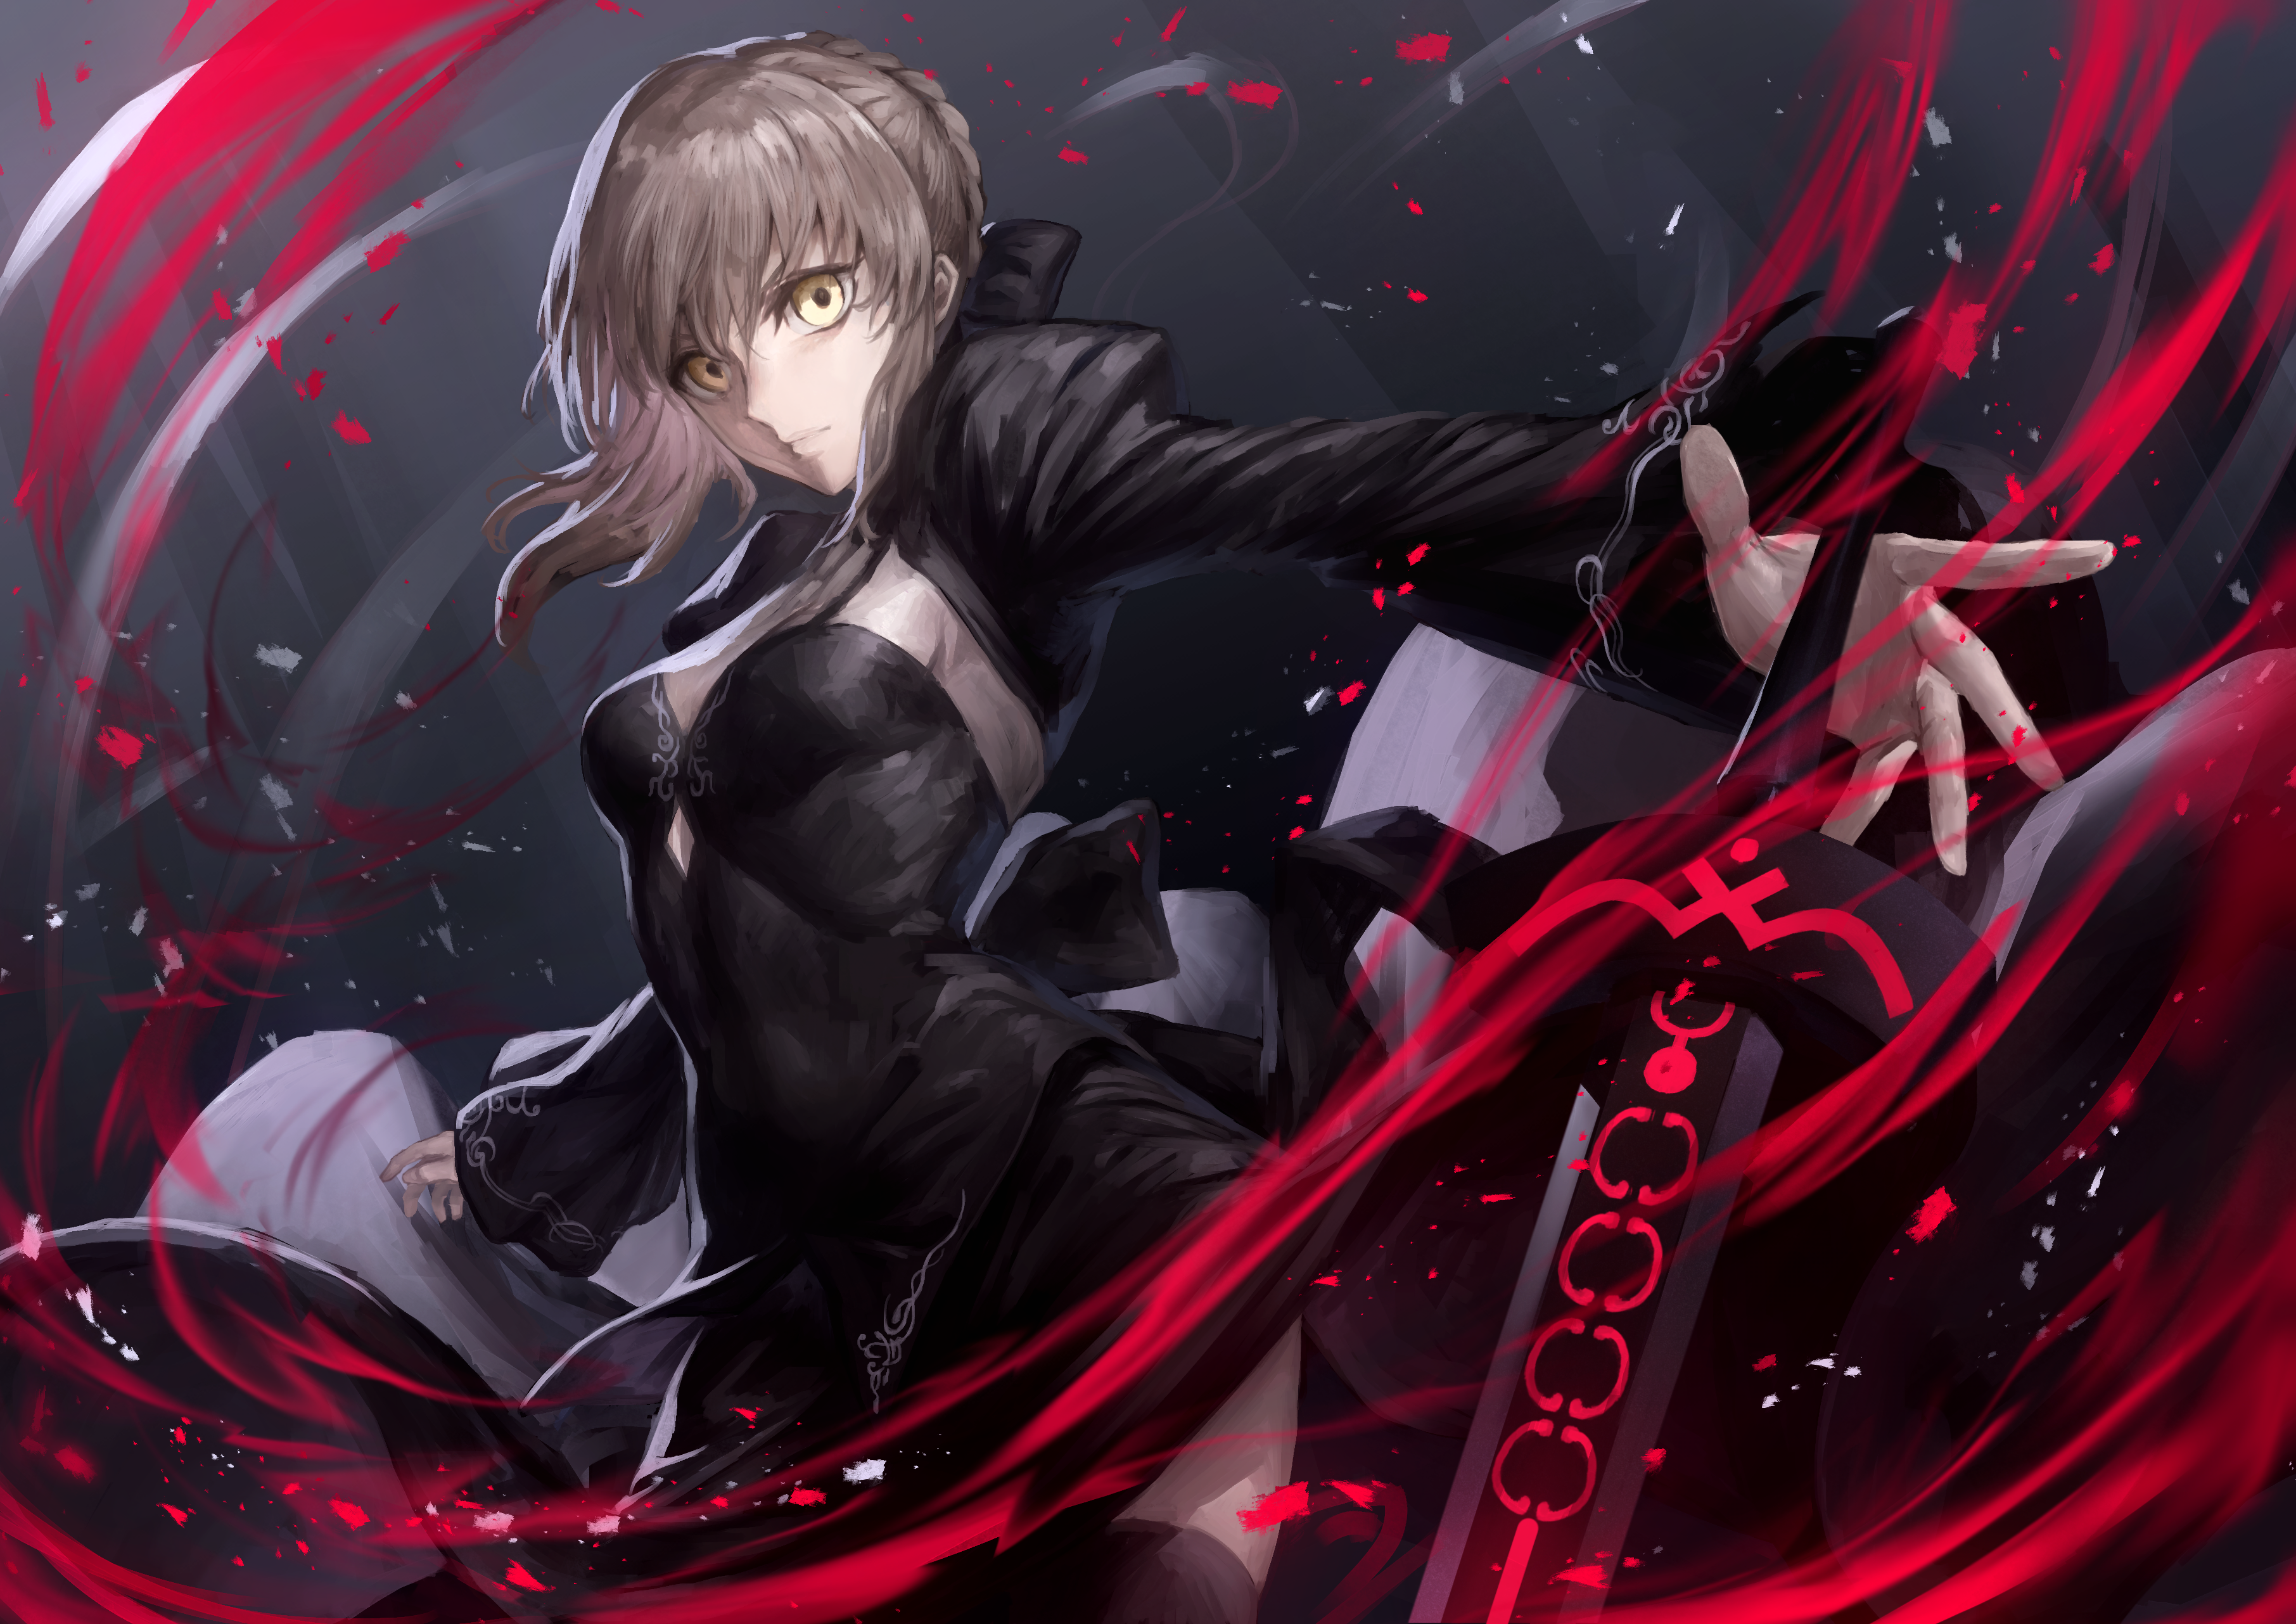 Anime Girls Anime Fate Grand Order Saber Alter Peperon Fate Stay Night Fate Stay Night Heavens Feel Wallpaper Resolution 3624x2563 Id 287809 Wallha Com